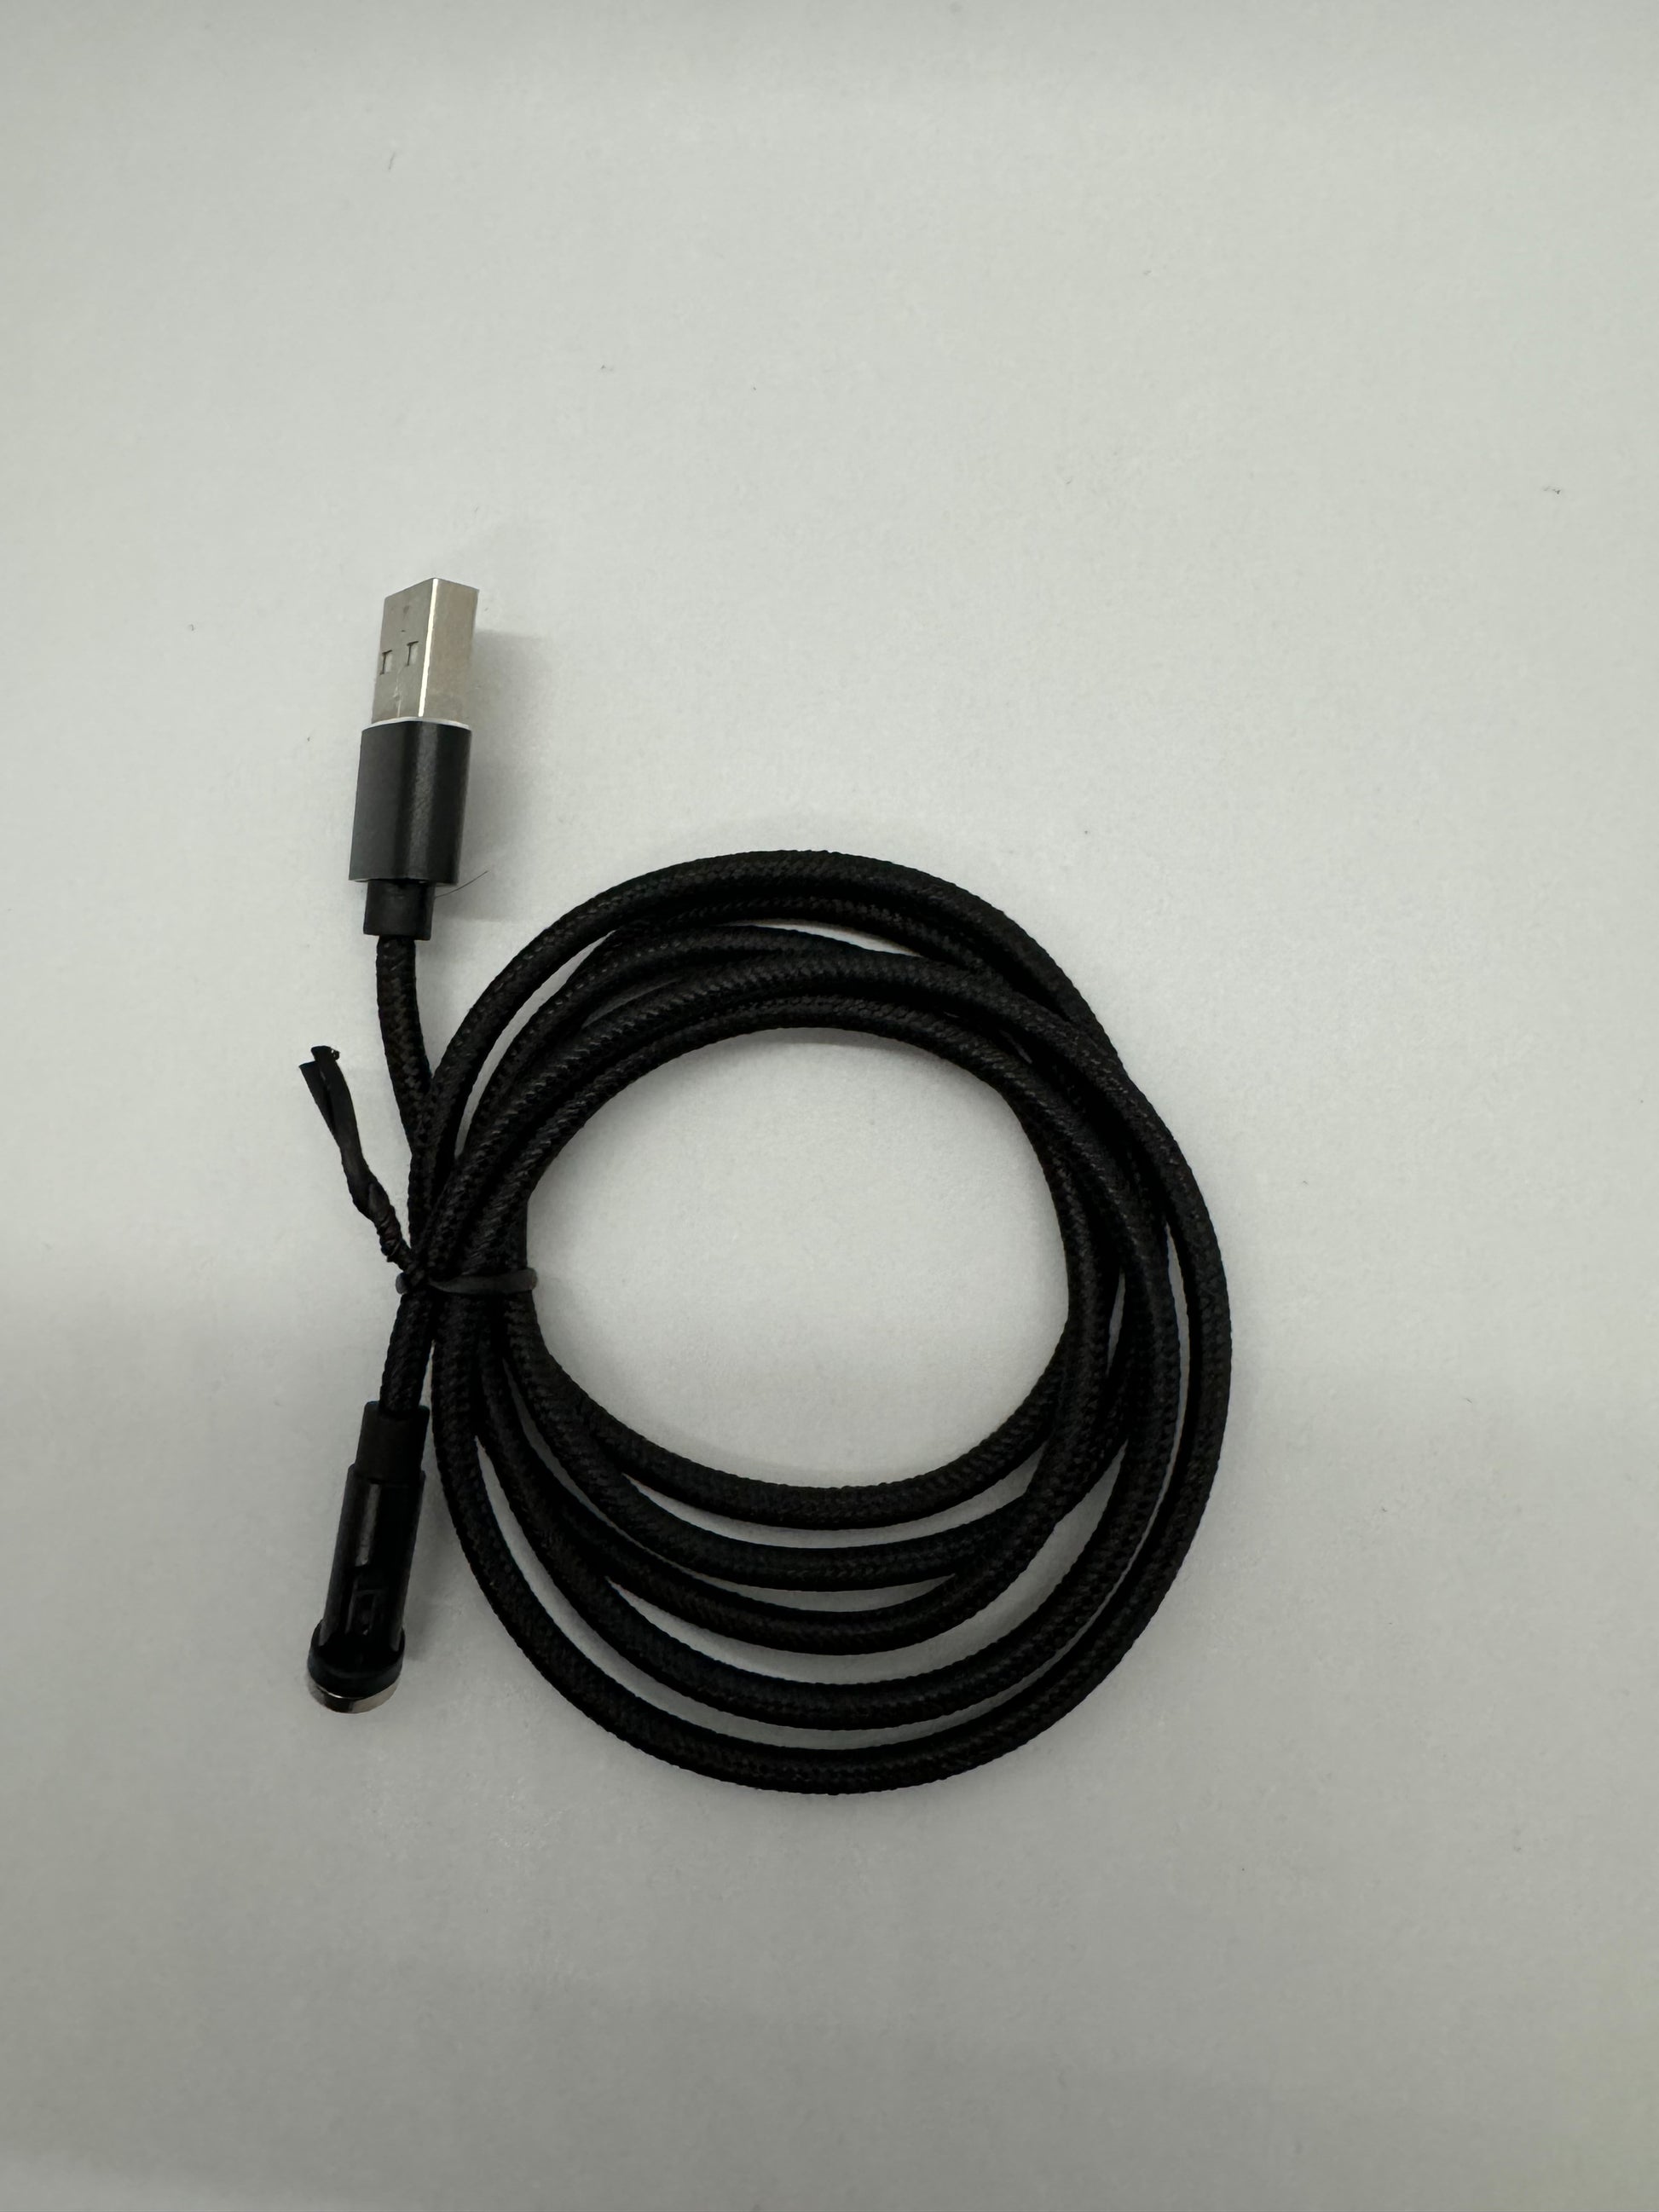 The picture shows a black USB cable on a white background. The cable is coiled up and has a braided texture. One end of the cable has a standard USB connector, which is silver with a black casing. The other end of the cable is not fully visible, but it appears to be a smaller connector, possibly a micro USB, and it is also black.